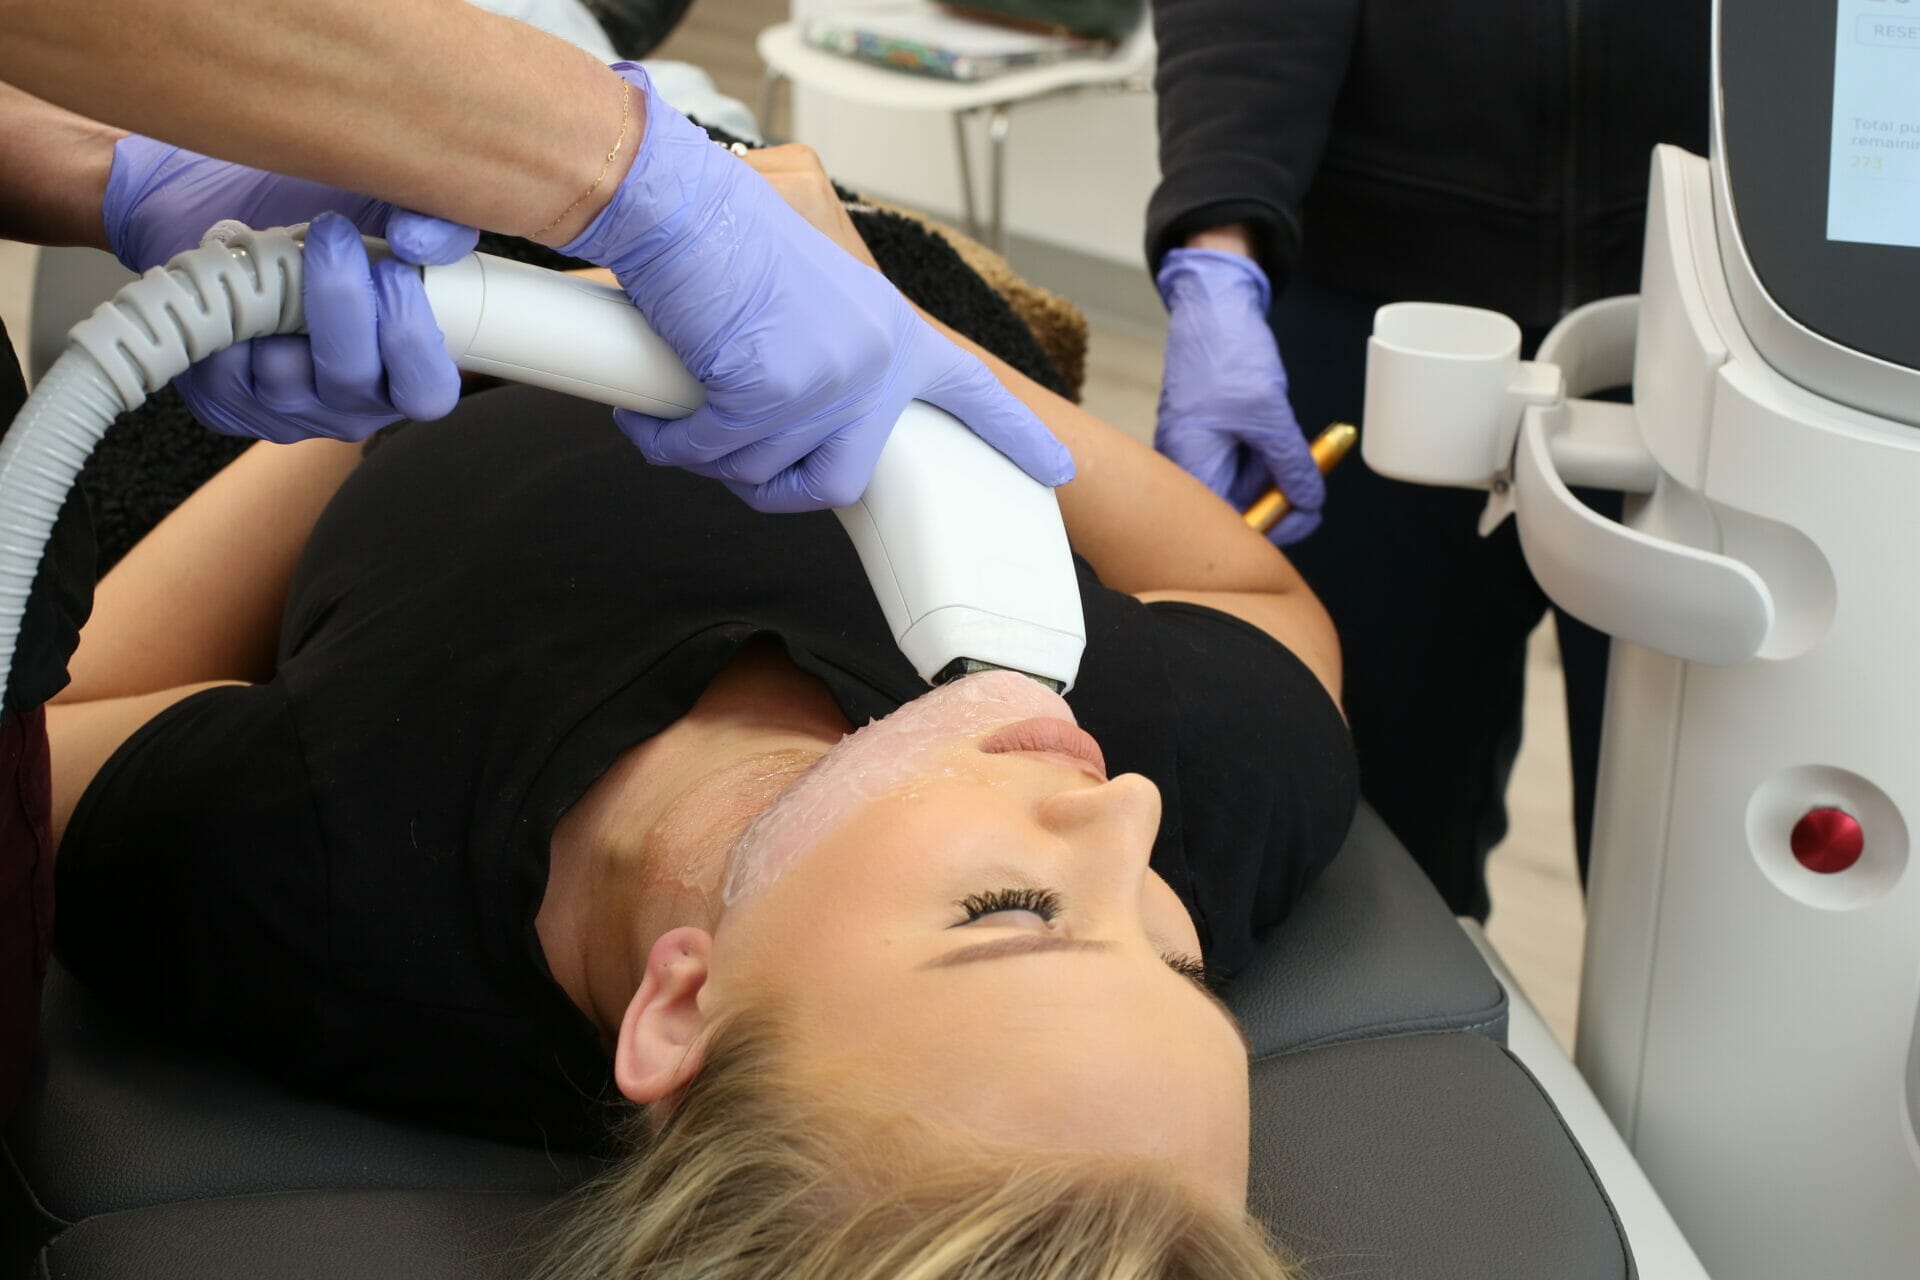 Sofwave from Evolution Dermatology in Boulder CO reduces wrinkles in chin